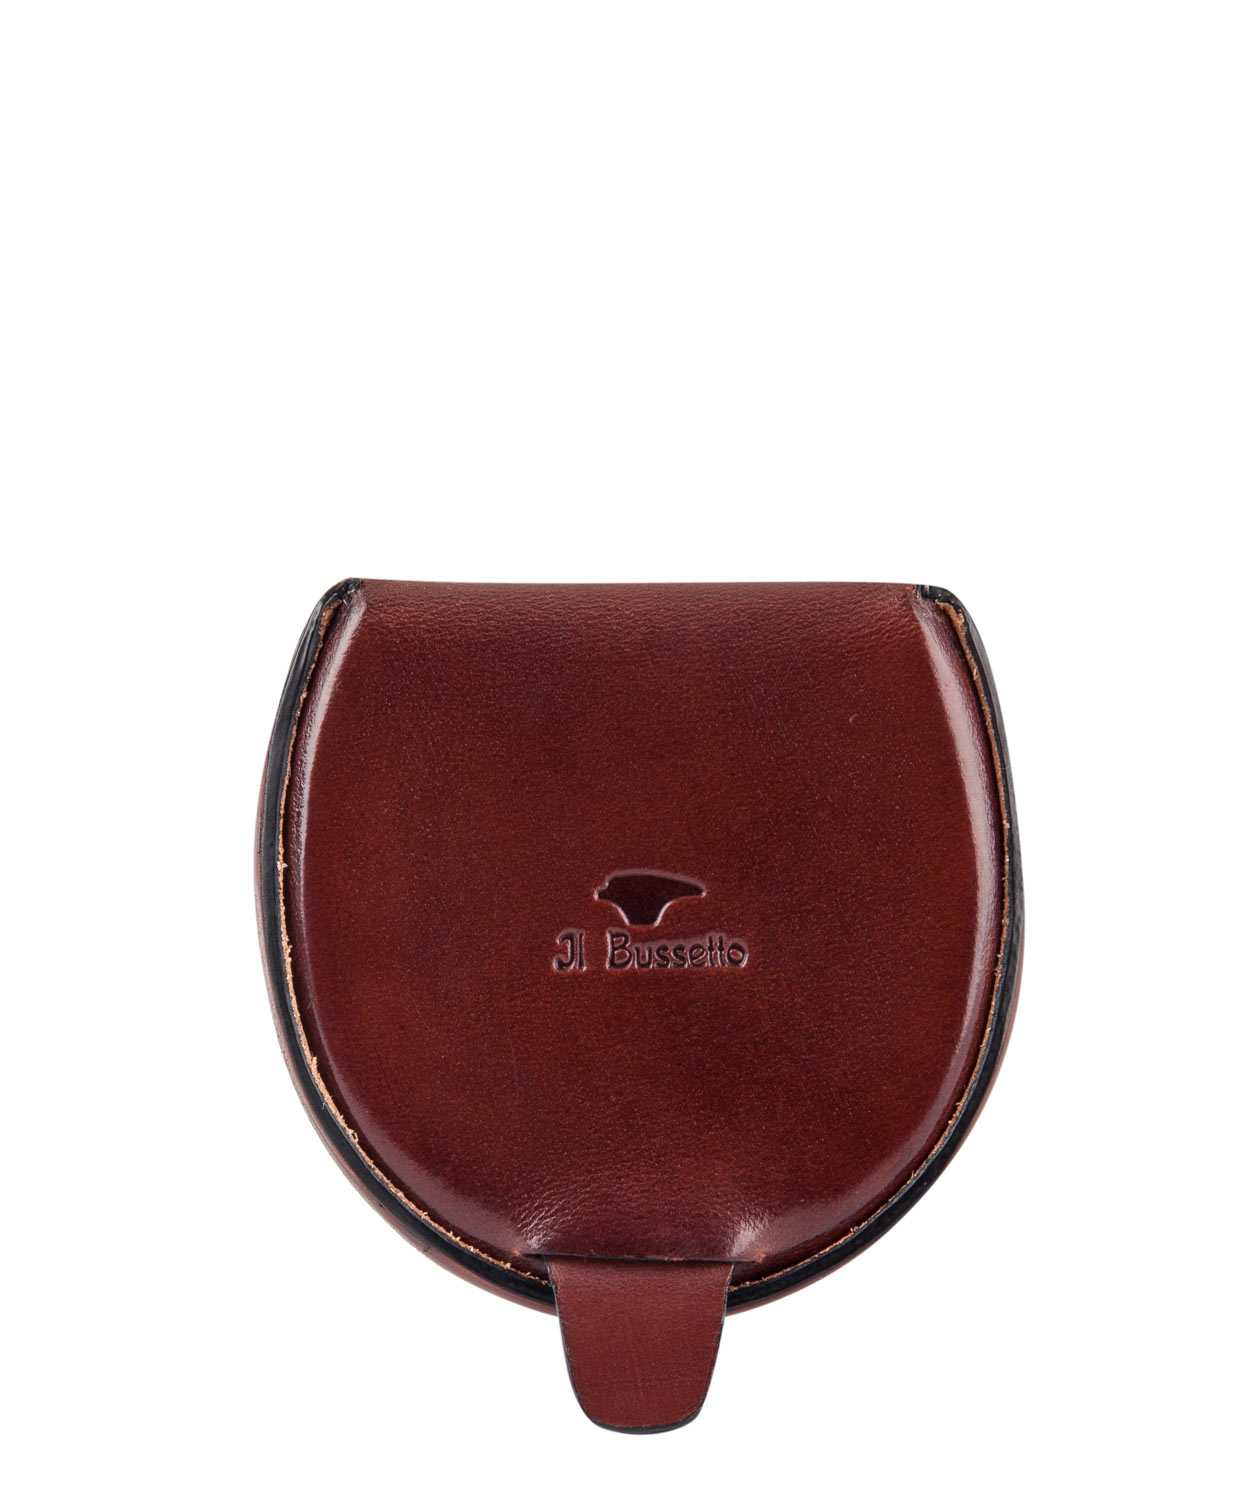 Il Bussetto Brown Leather Coin Case in Brown for Men | Lyst